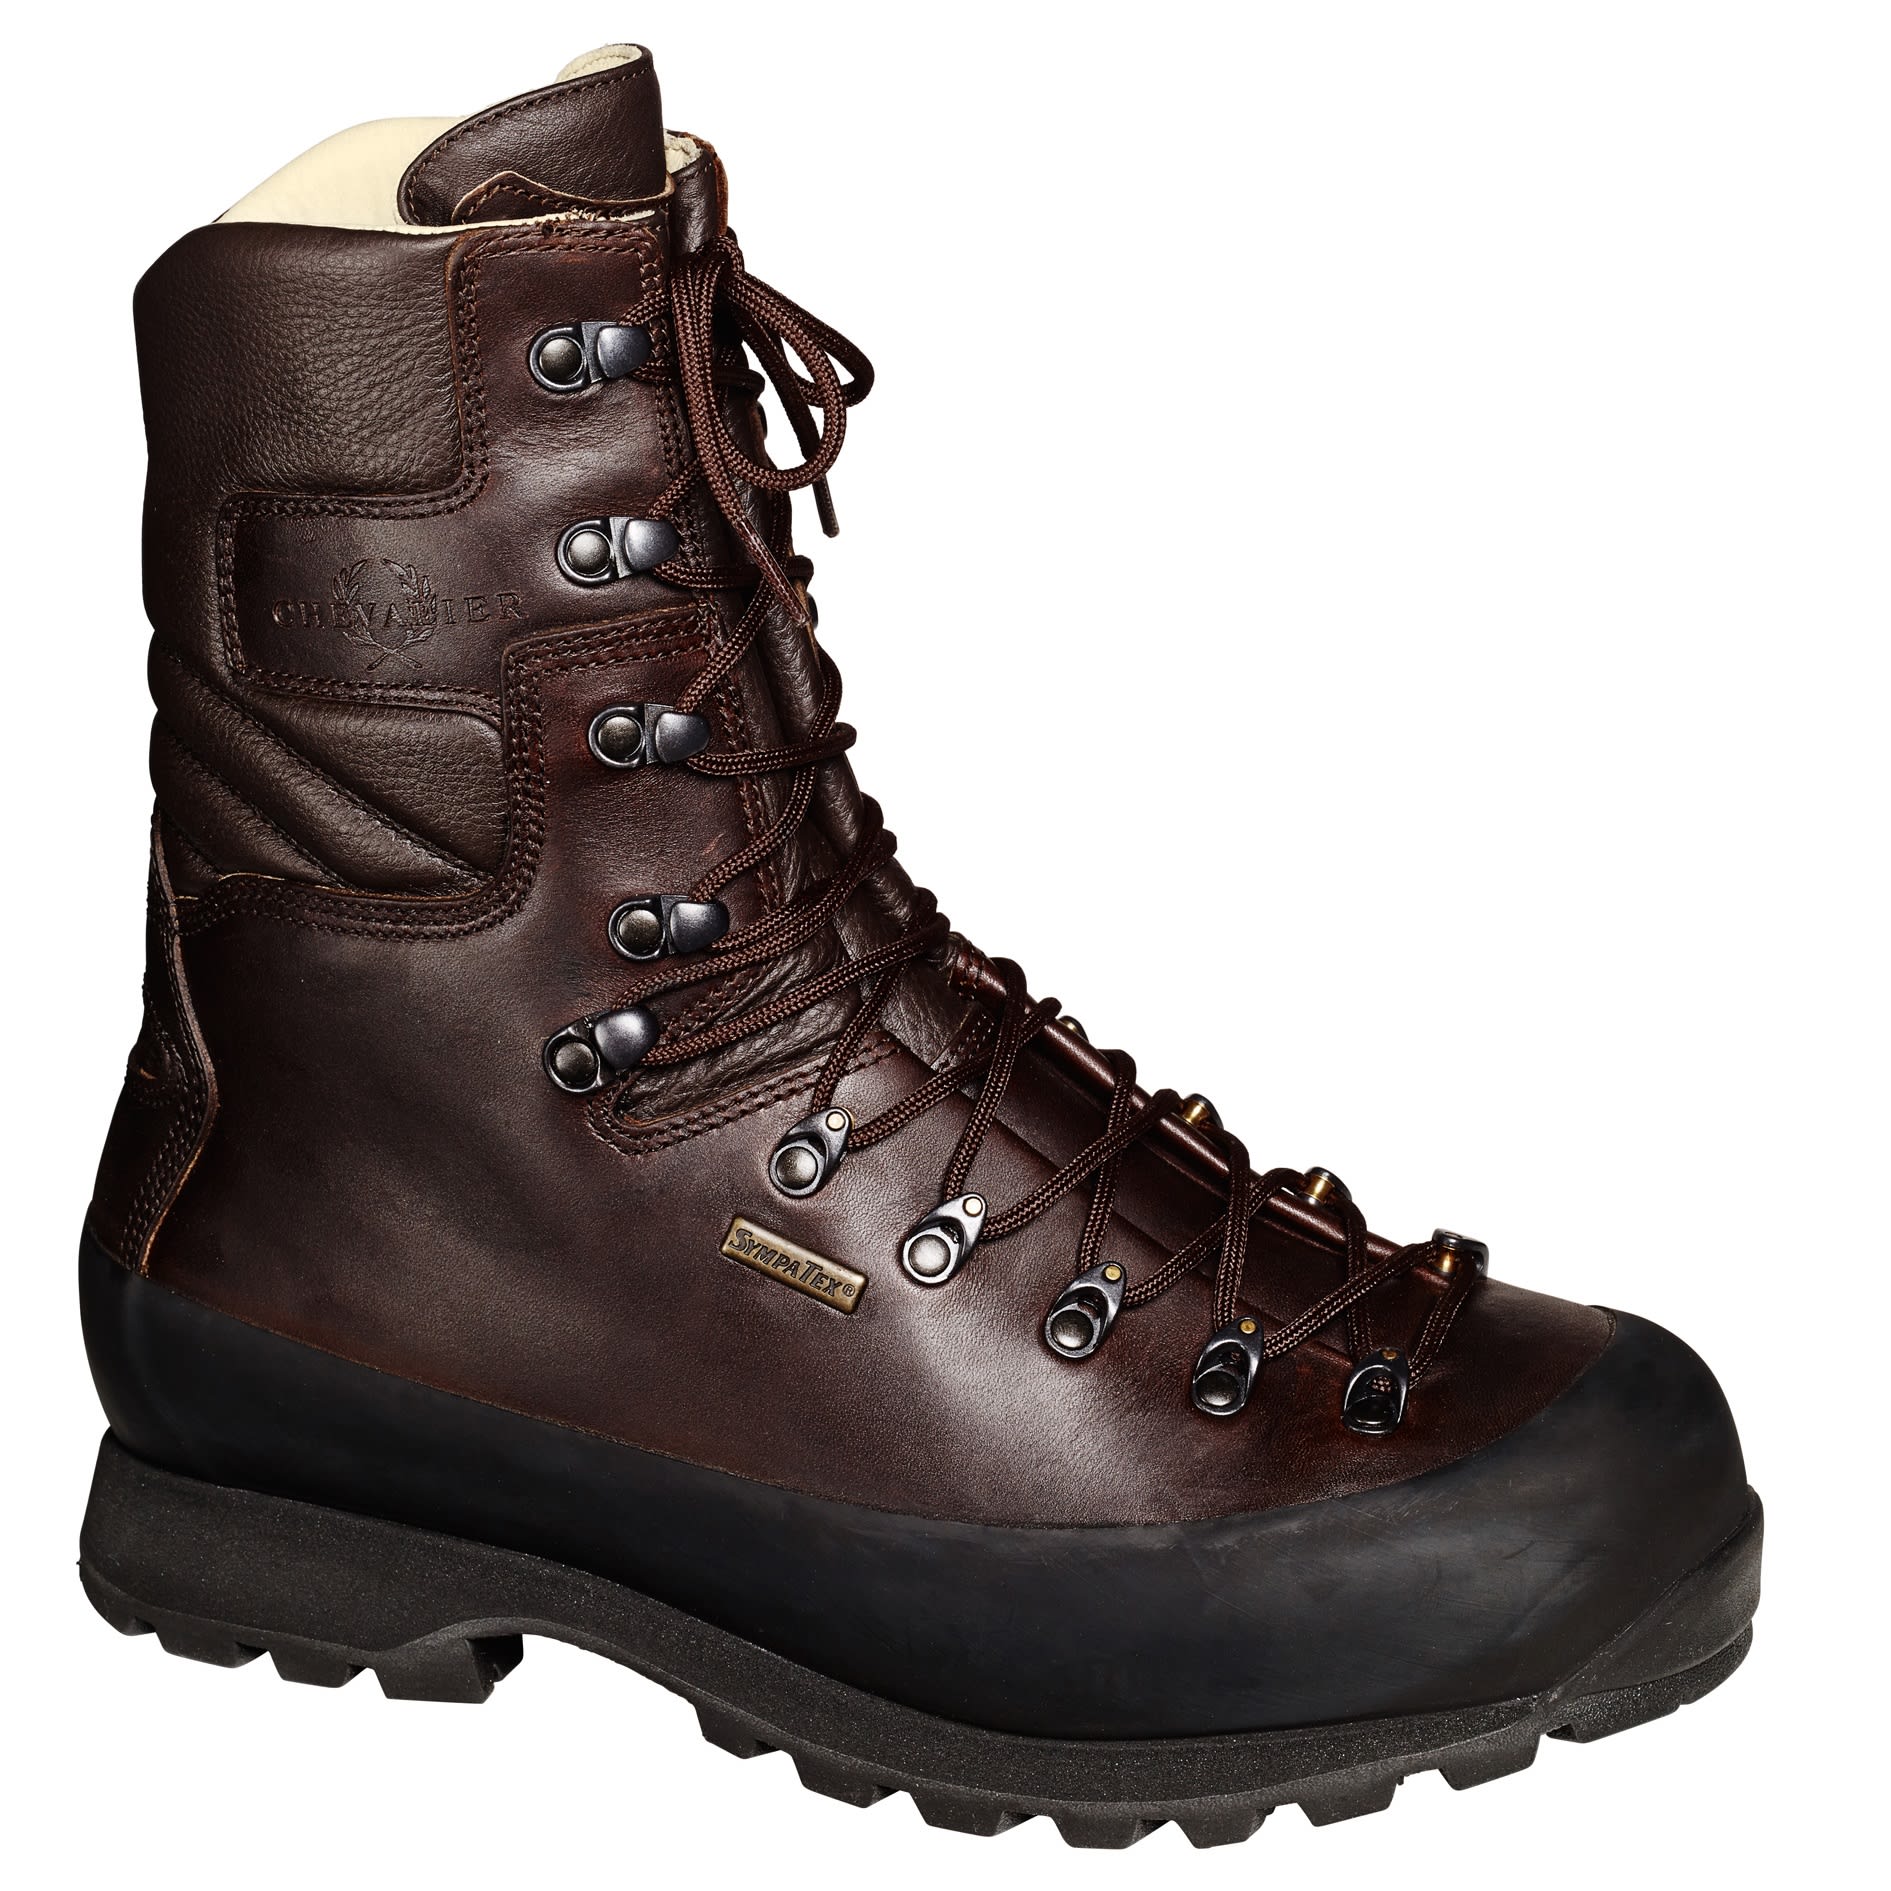 Buy Chevalier Tundra Boot with Sympatex 